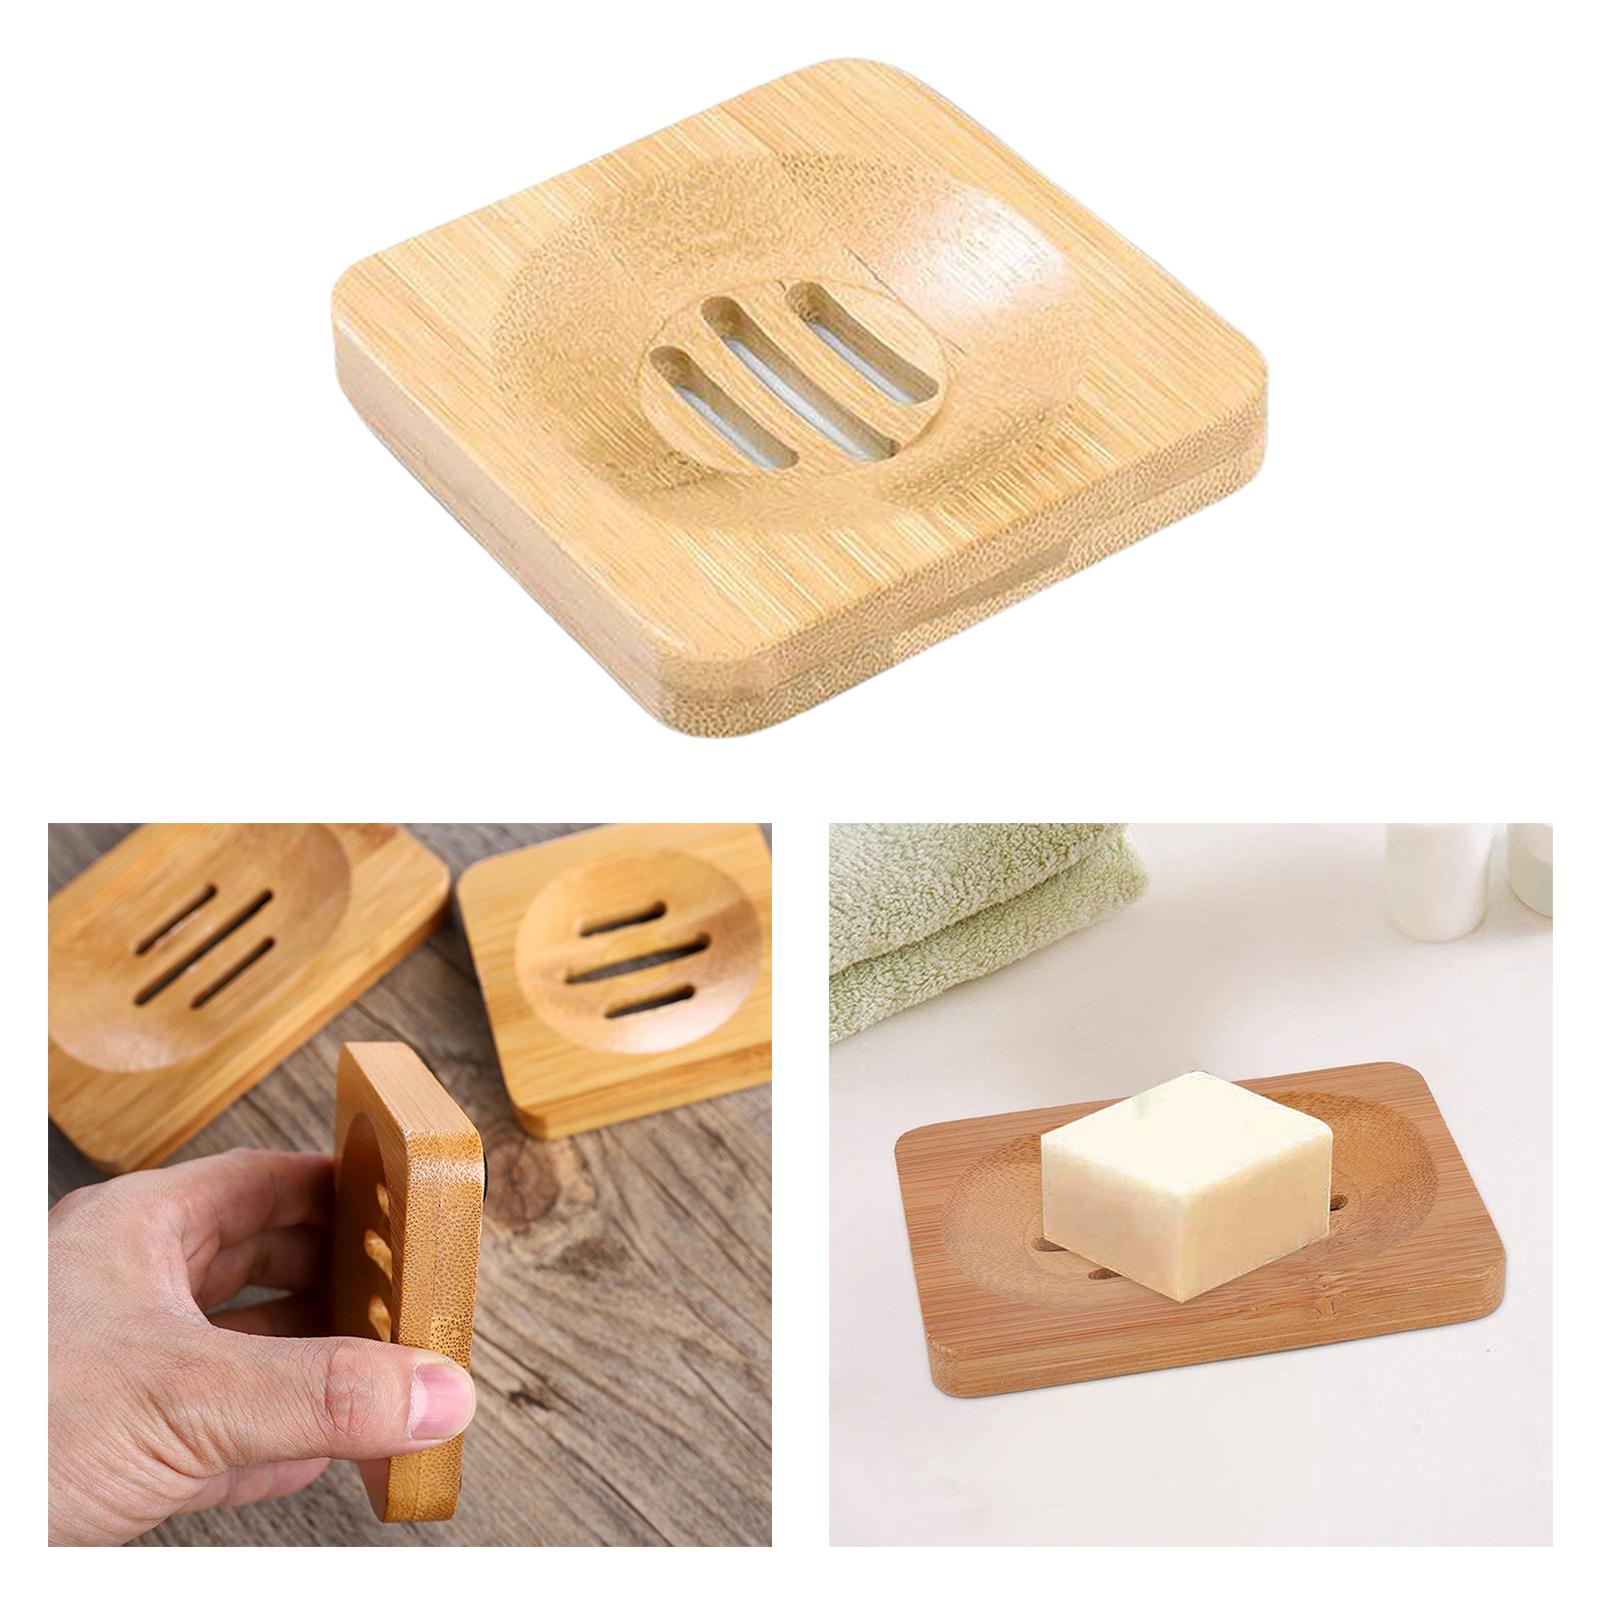 Soap Rack Tray Soap Holder Bamboo Dish Plate for Bath Kitchen Square